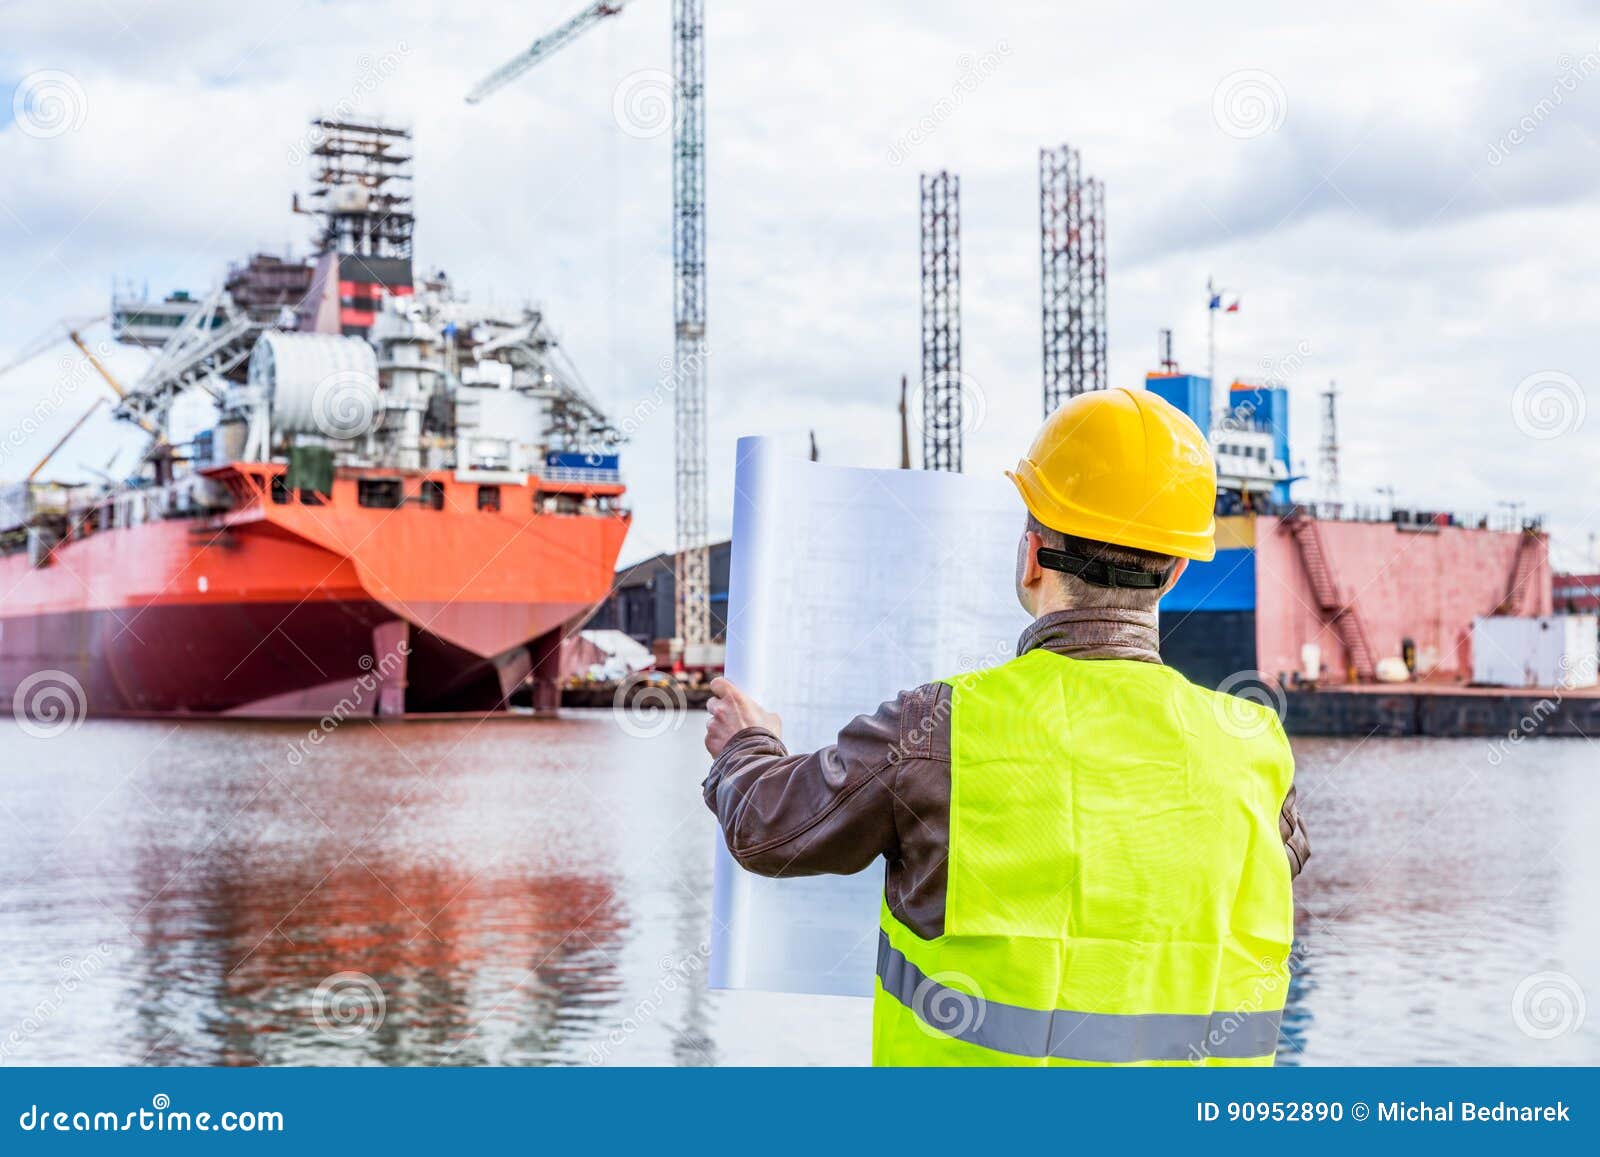 shipbuilding engineer checking documents at the dock side in a port.